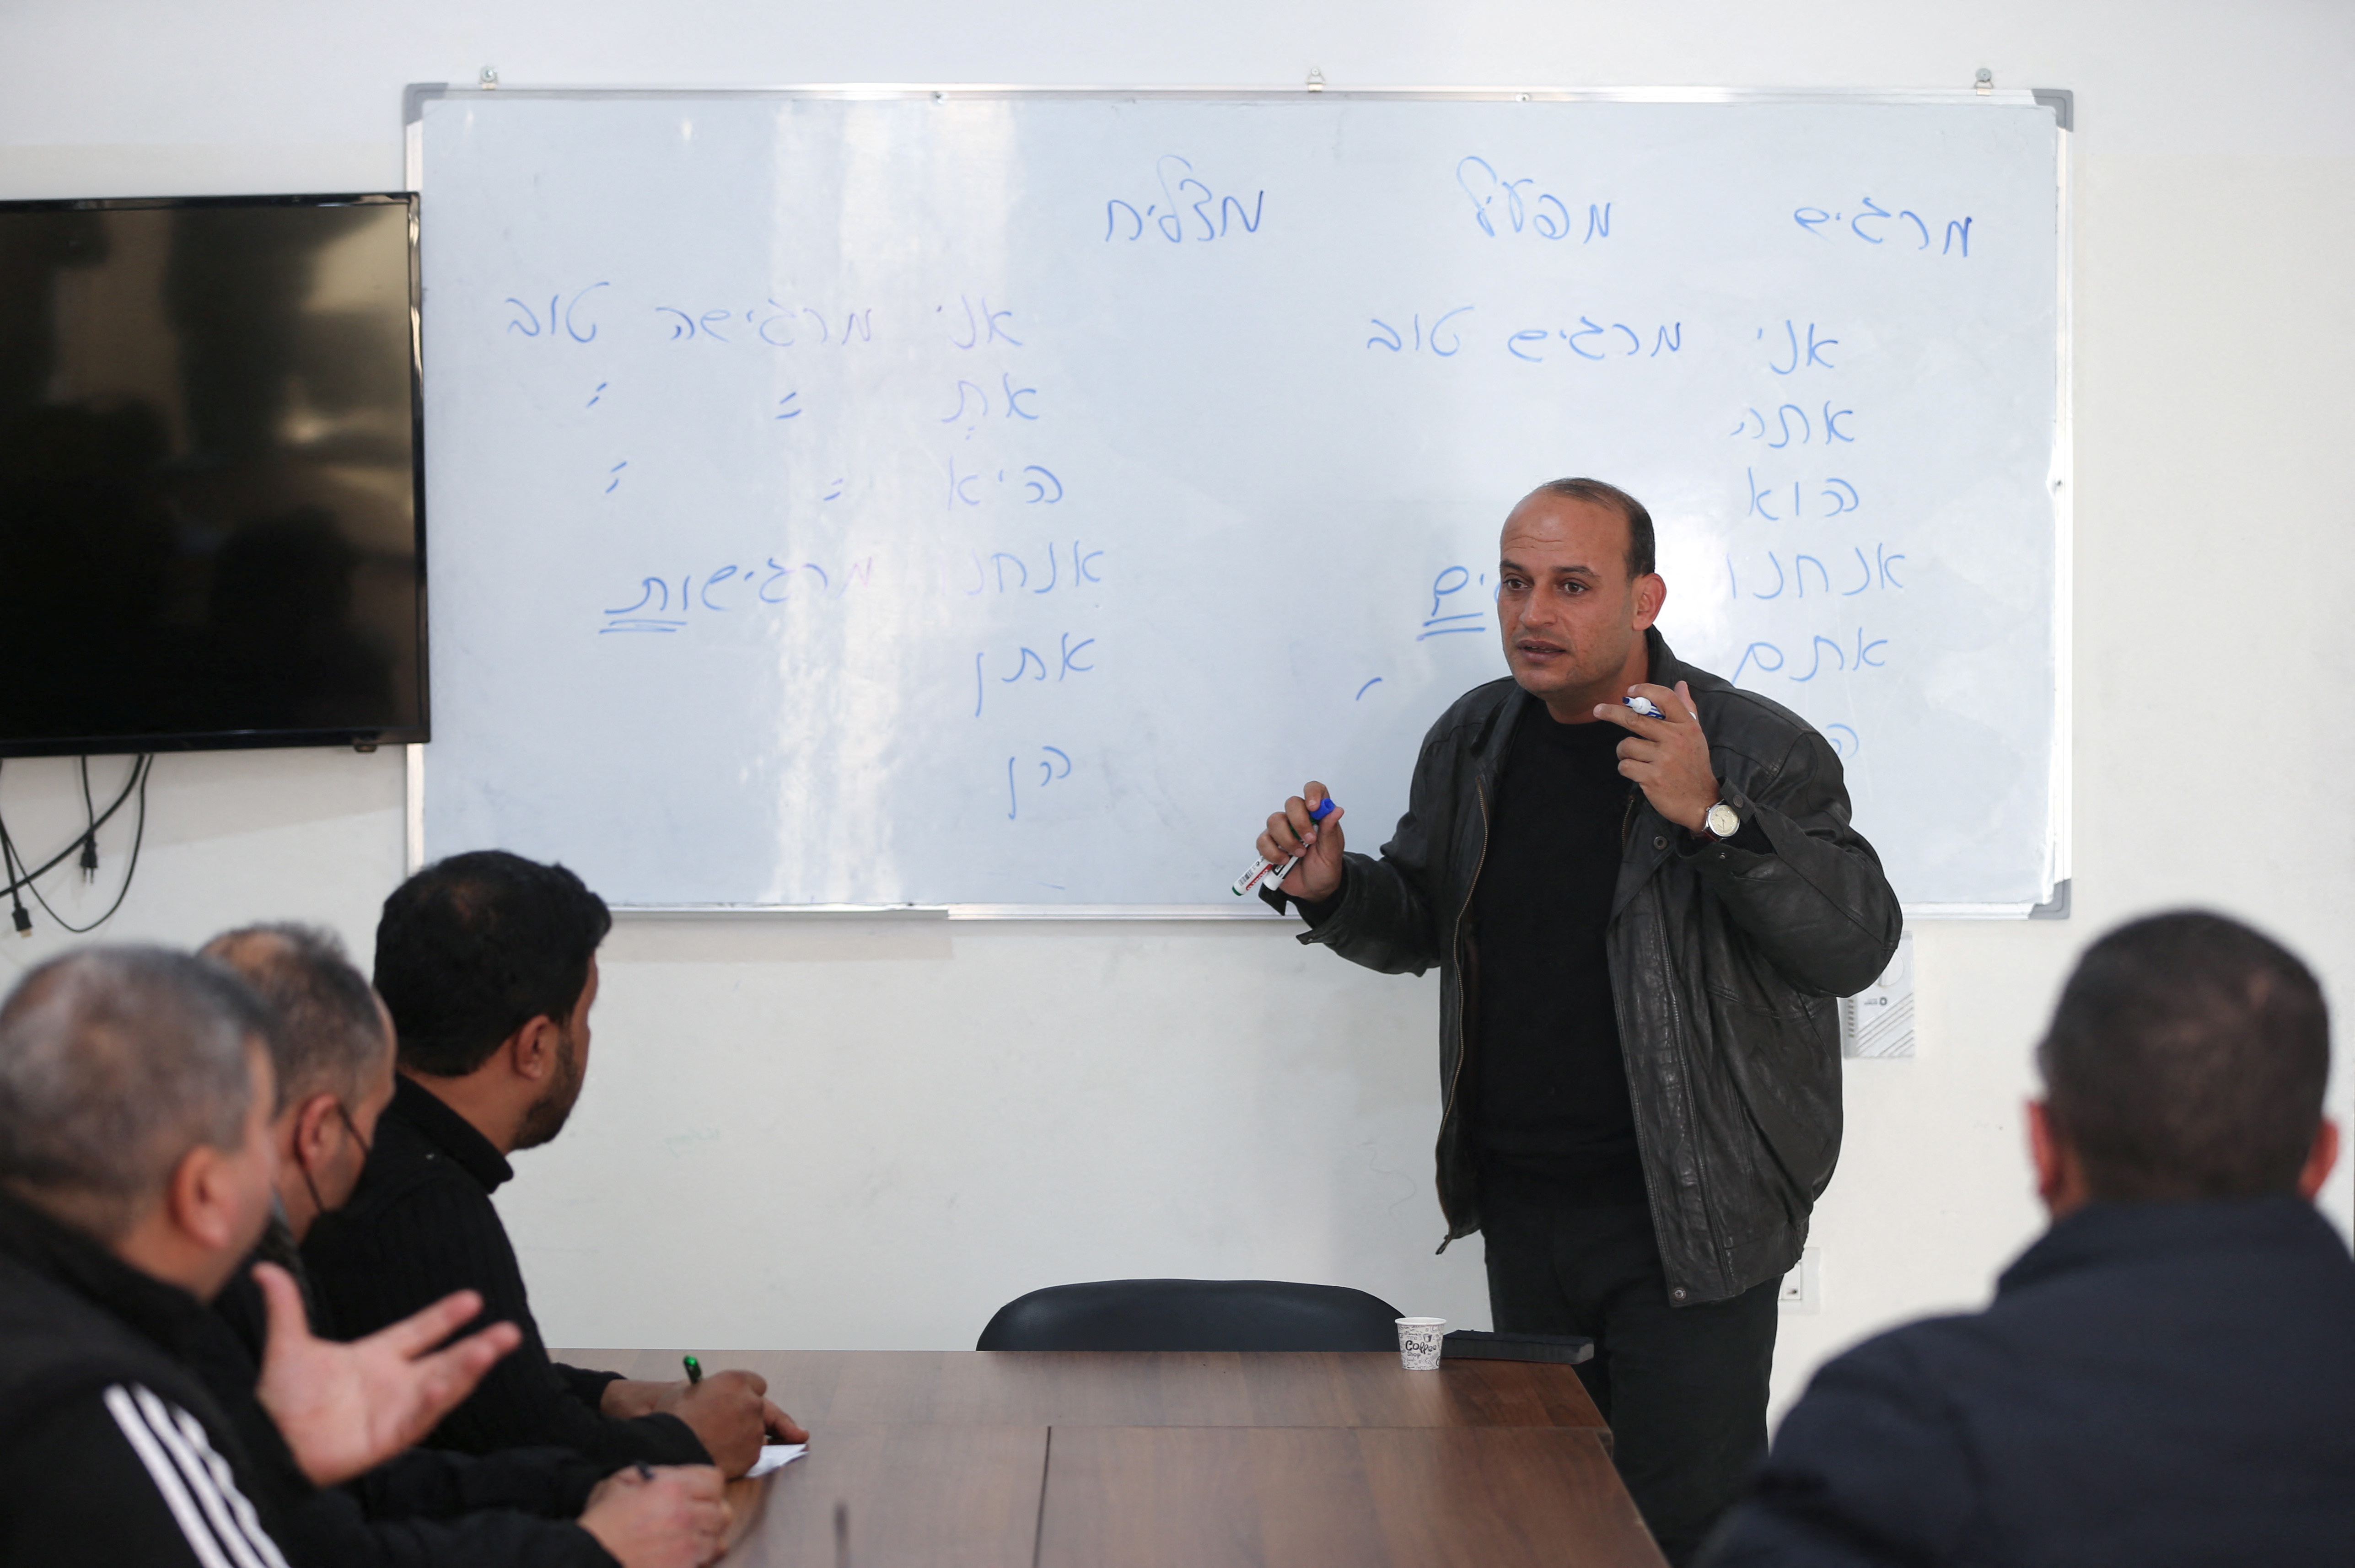 A Palestinian teacher teaches Hebrew language to a group of students at Nafha Language Center, in Khan Younis in the southern Gaza Strip February 16, 2022. REUTERS/Ibraheem Abu Mustafa